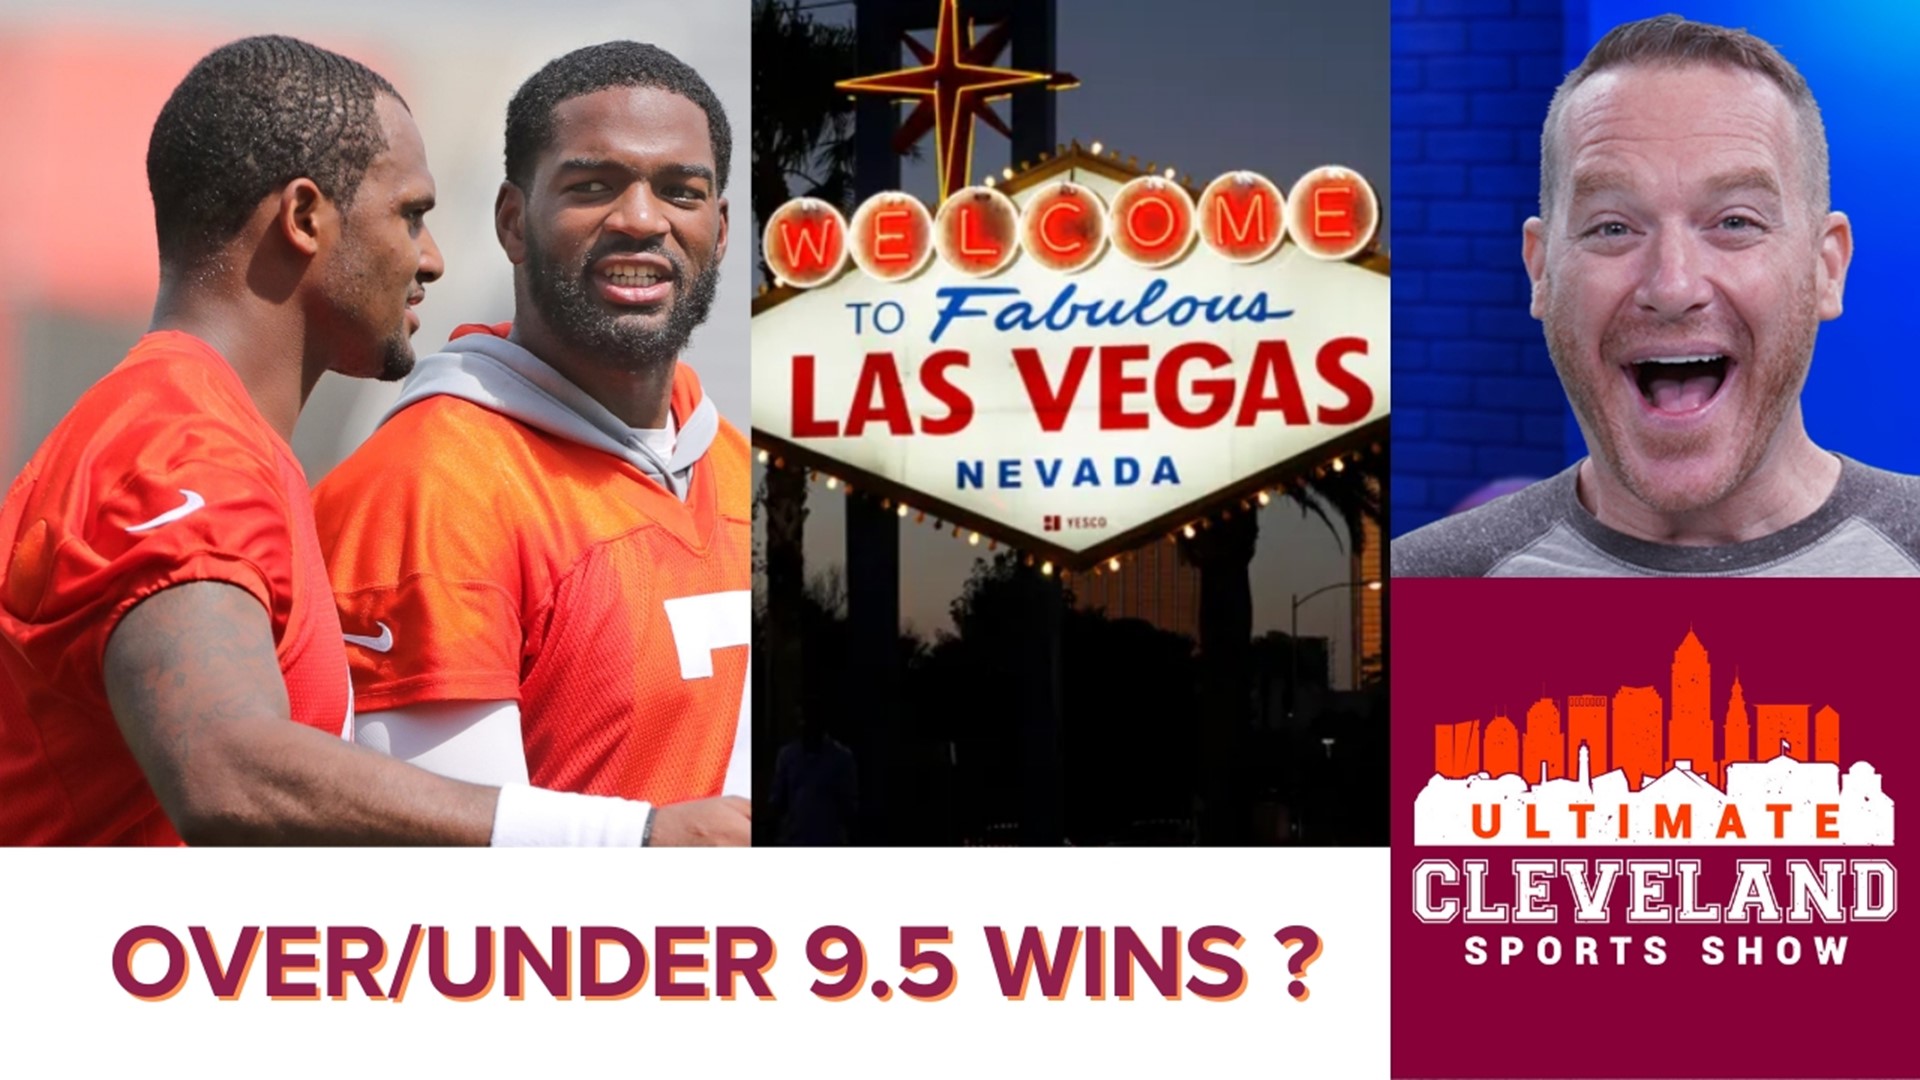 Adam "The Bull" thinks Las Vegas knows Deshaun Watson will play for at least half the season if they set over/under 9.5 wins.